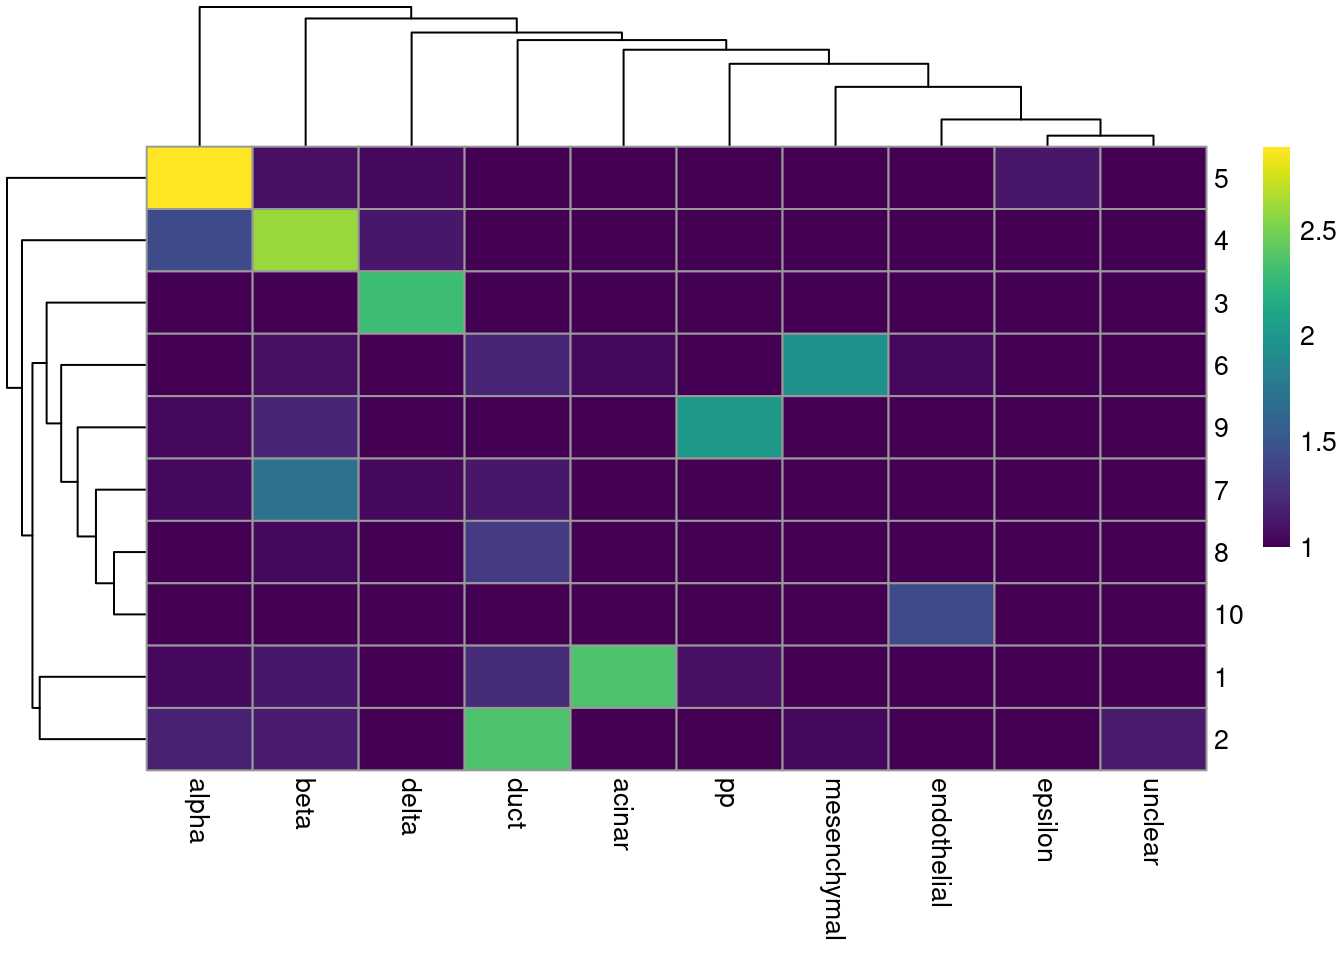 Heatmap of the frequency of cells from each cell type label in each cluster.